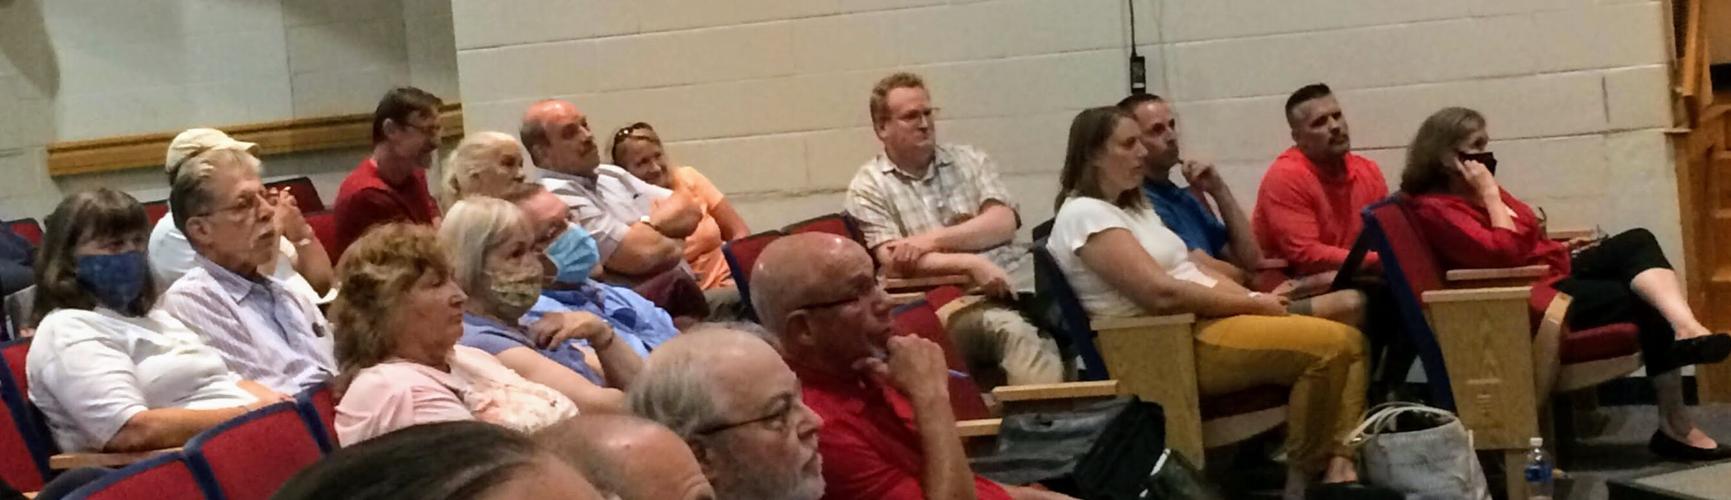 Audience at Hinsdale meeting on RV park